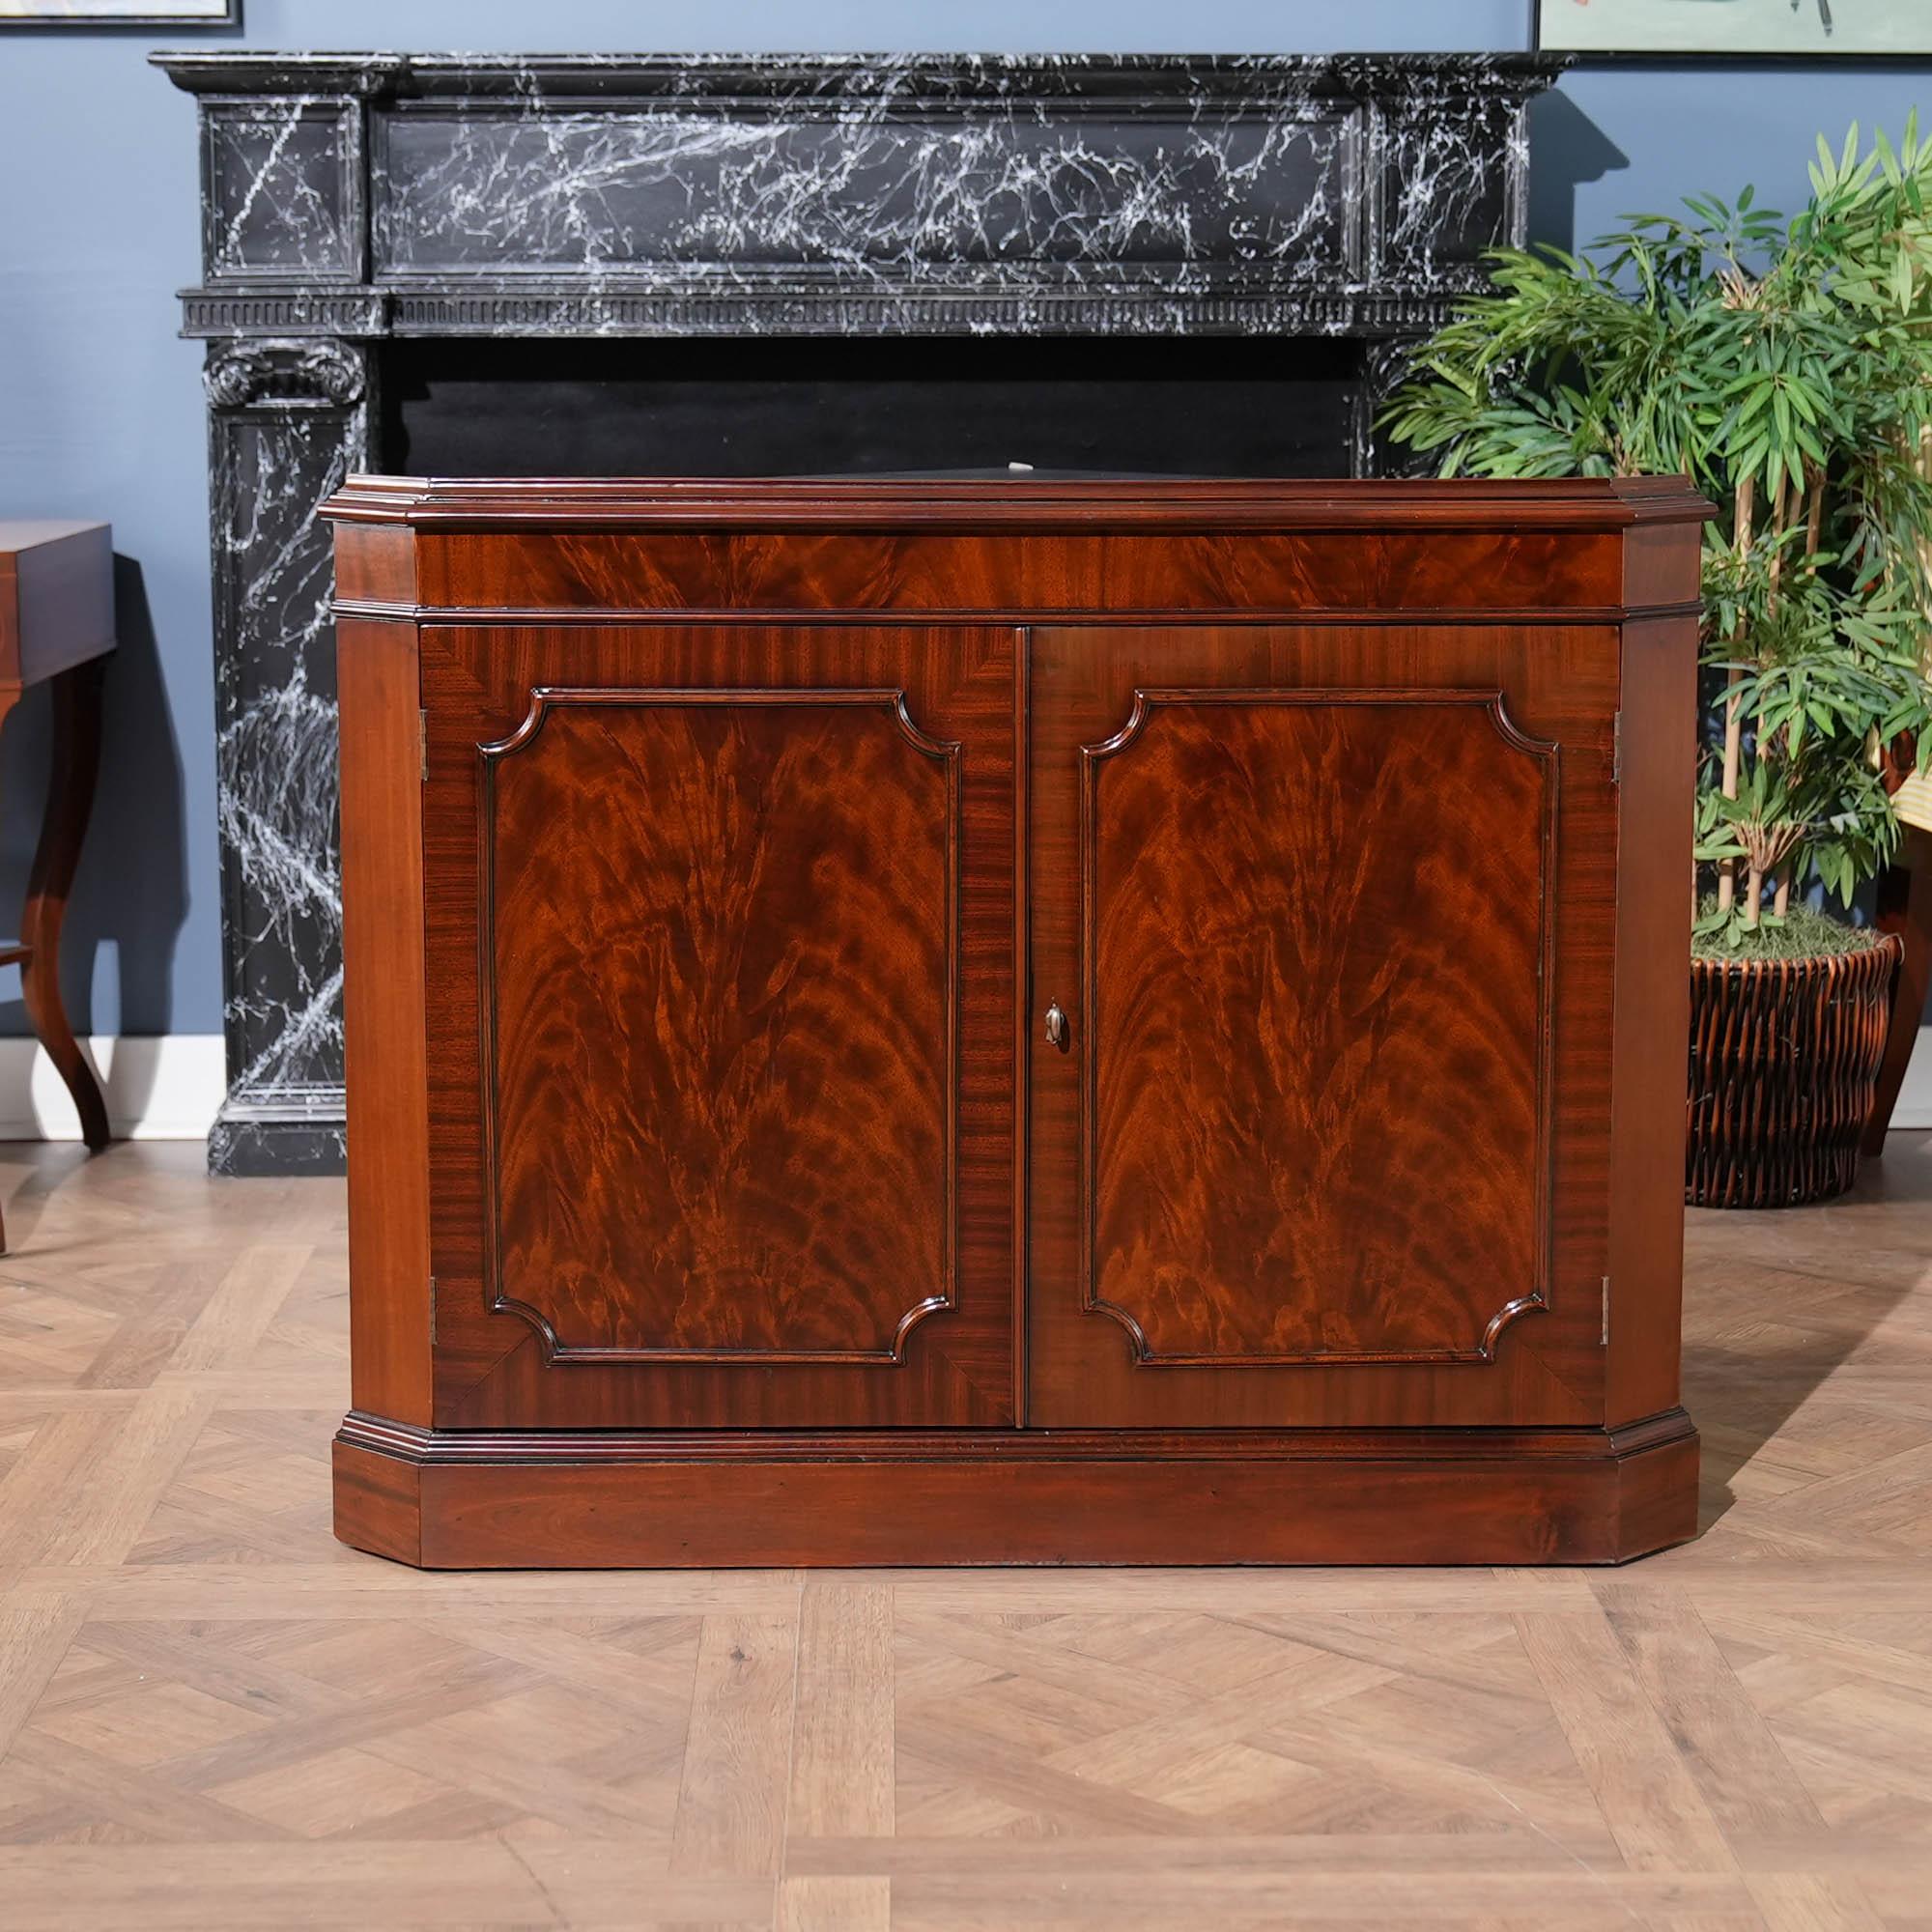 This double door, Large Mahogany Corner Cabinet is manufactured from kiln dried, plantation grown, mahogany, and features figured mahogany veneers on the door fronts. The attention to detail and expert craftsmanship is apparent in the hand carved